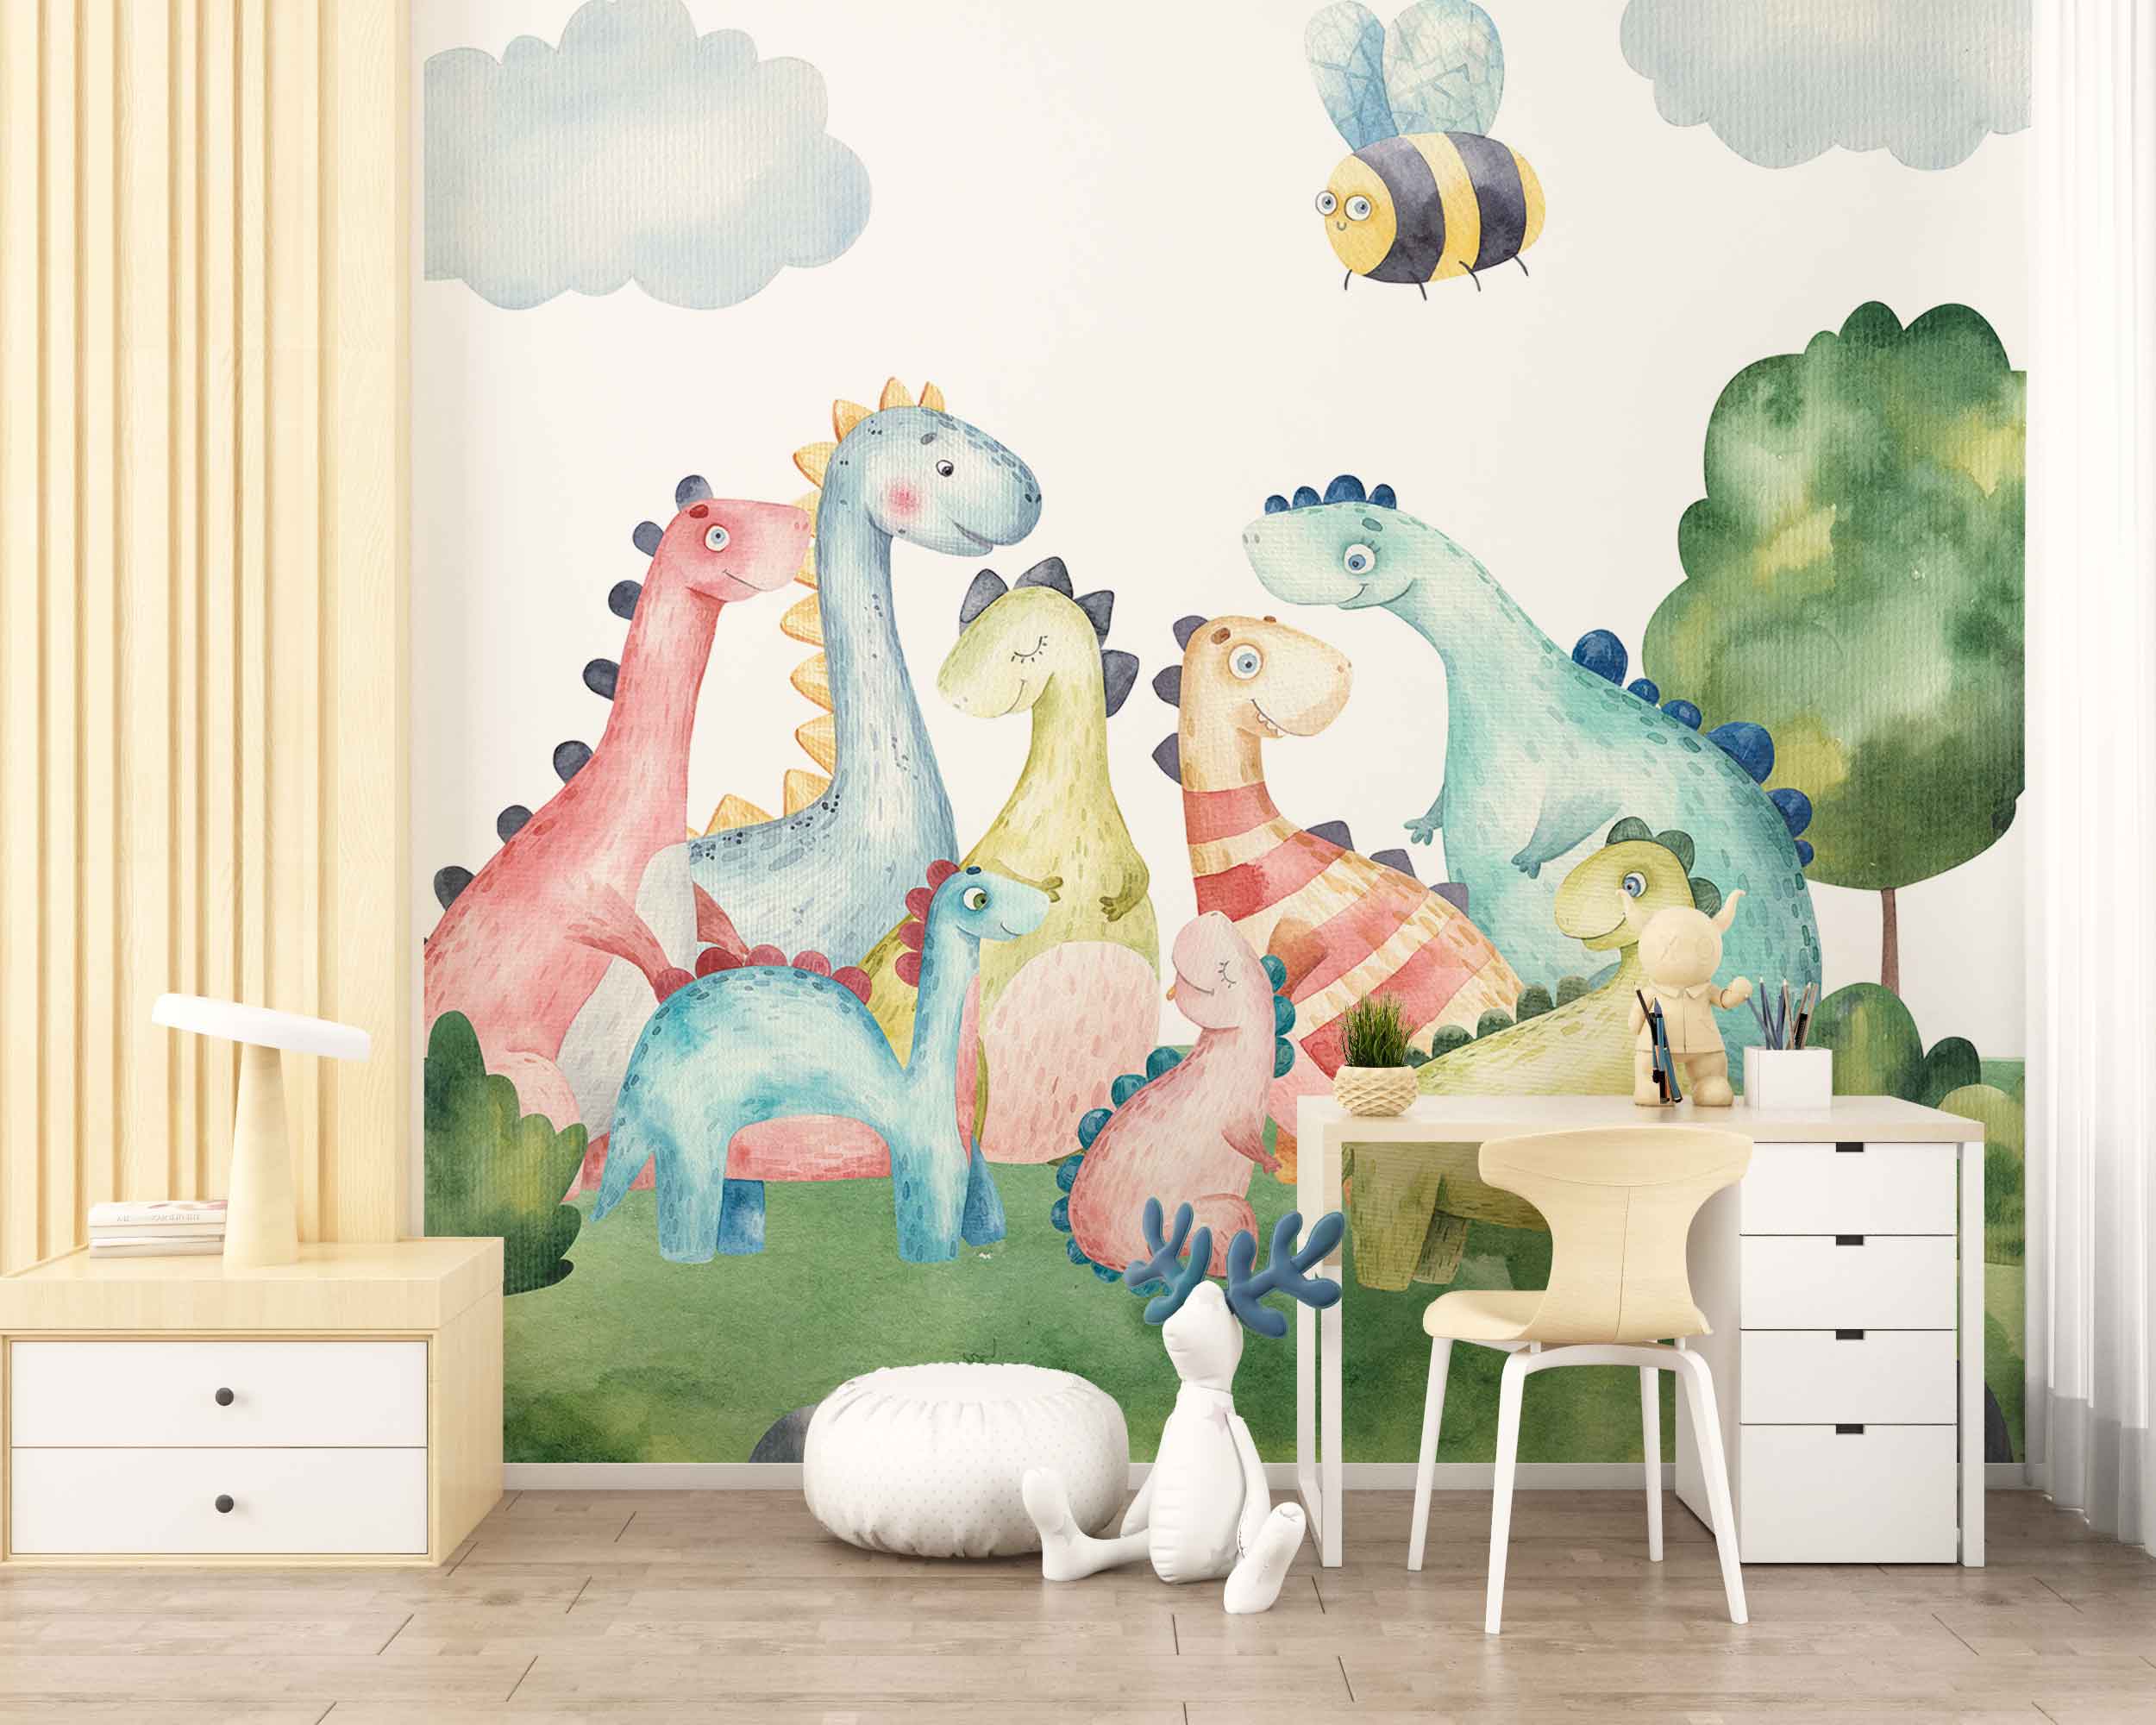 14 Dinosaur Wallpaper Inspirations to Make Kids Room Roar with Style